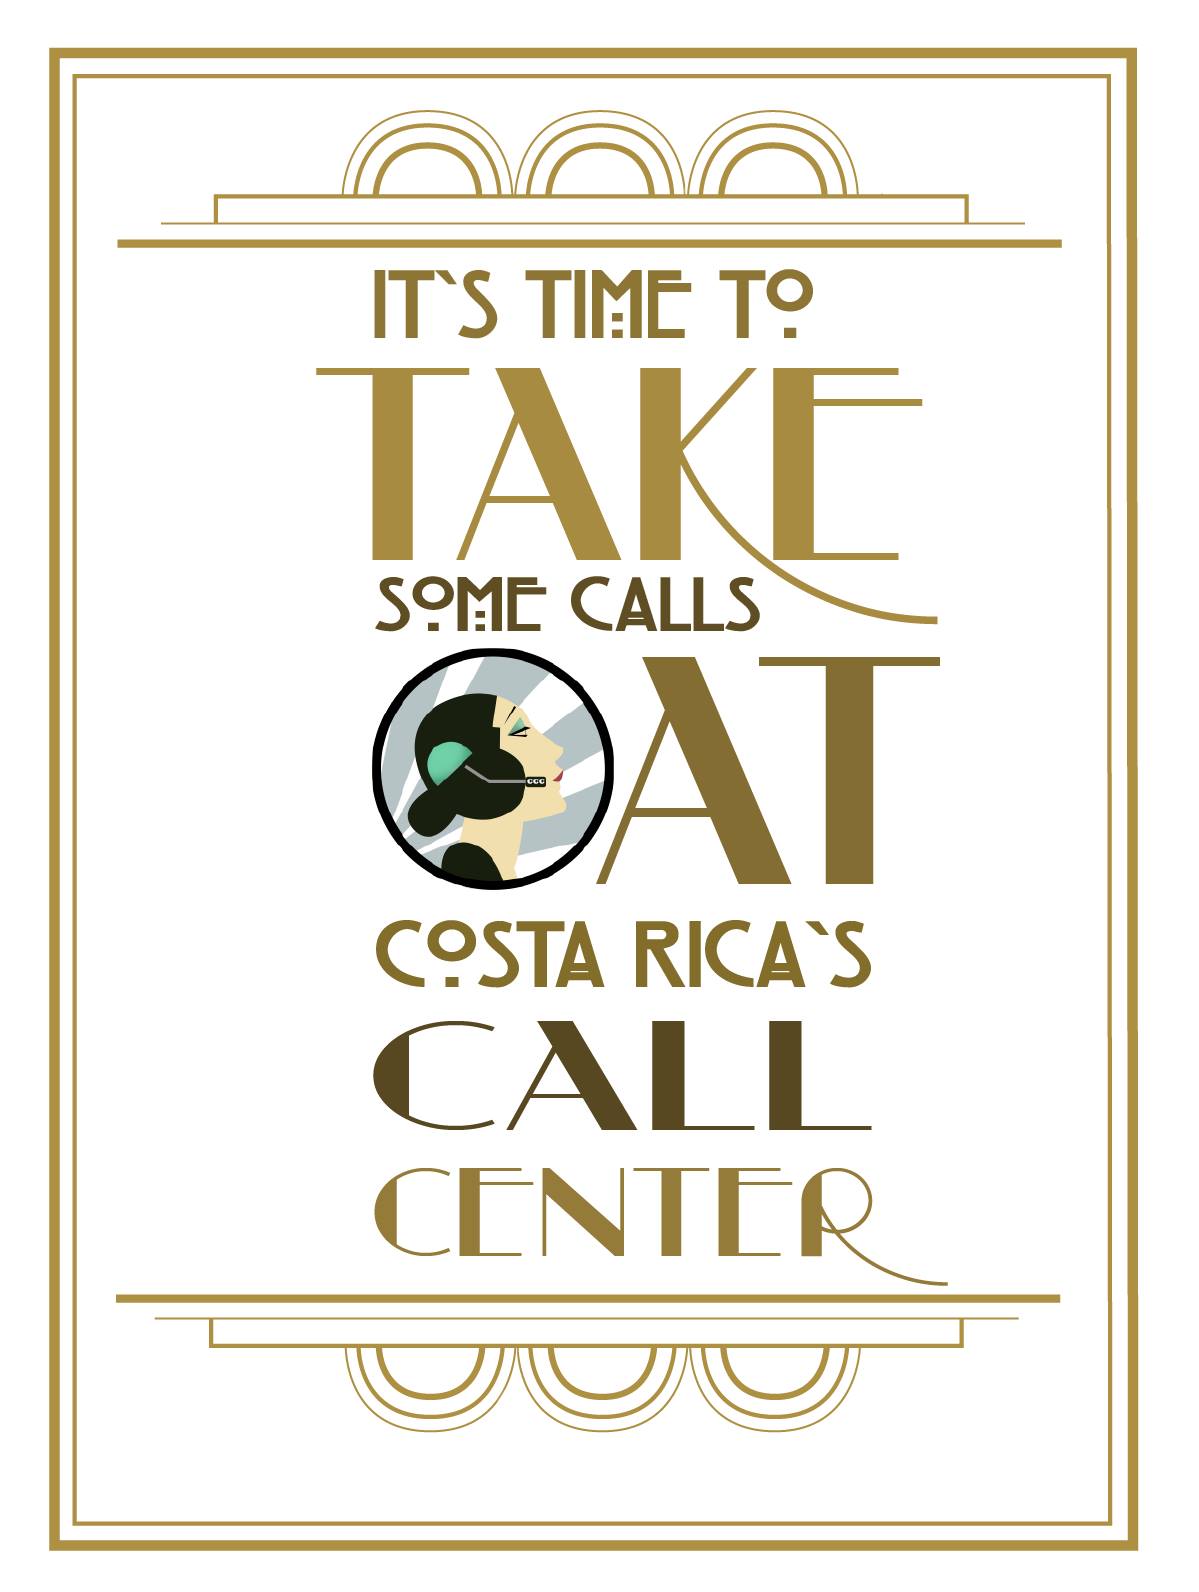 CALL CENTERS BILINGUAL TELEMARKETING JOB COSTA RICA.jpg THE OUTSOURCING INDUSTRY ACKNOWLEDGES A 10 YEAR ANNIVERSARY FOR COSTA RICA'S CALL CENTER. by richardblank